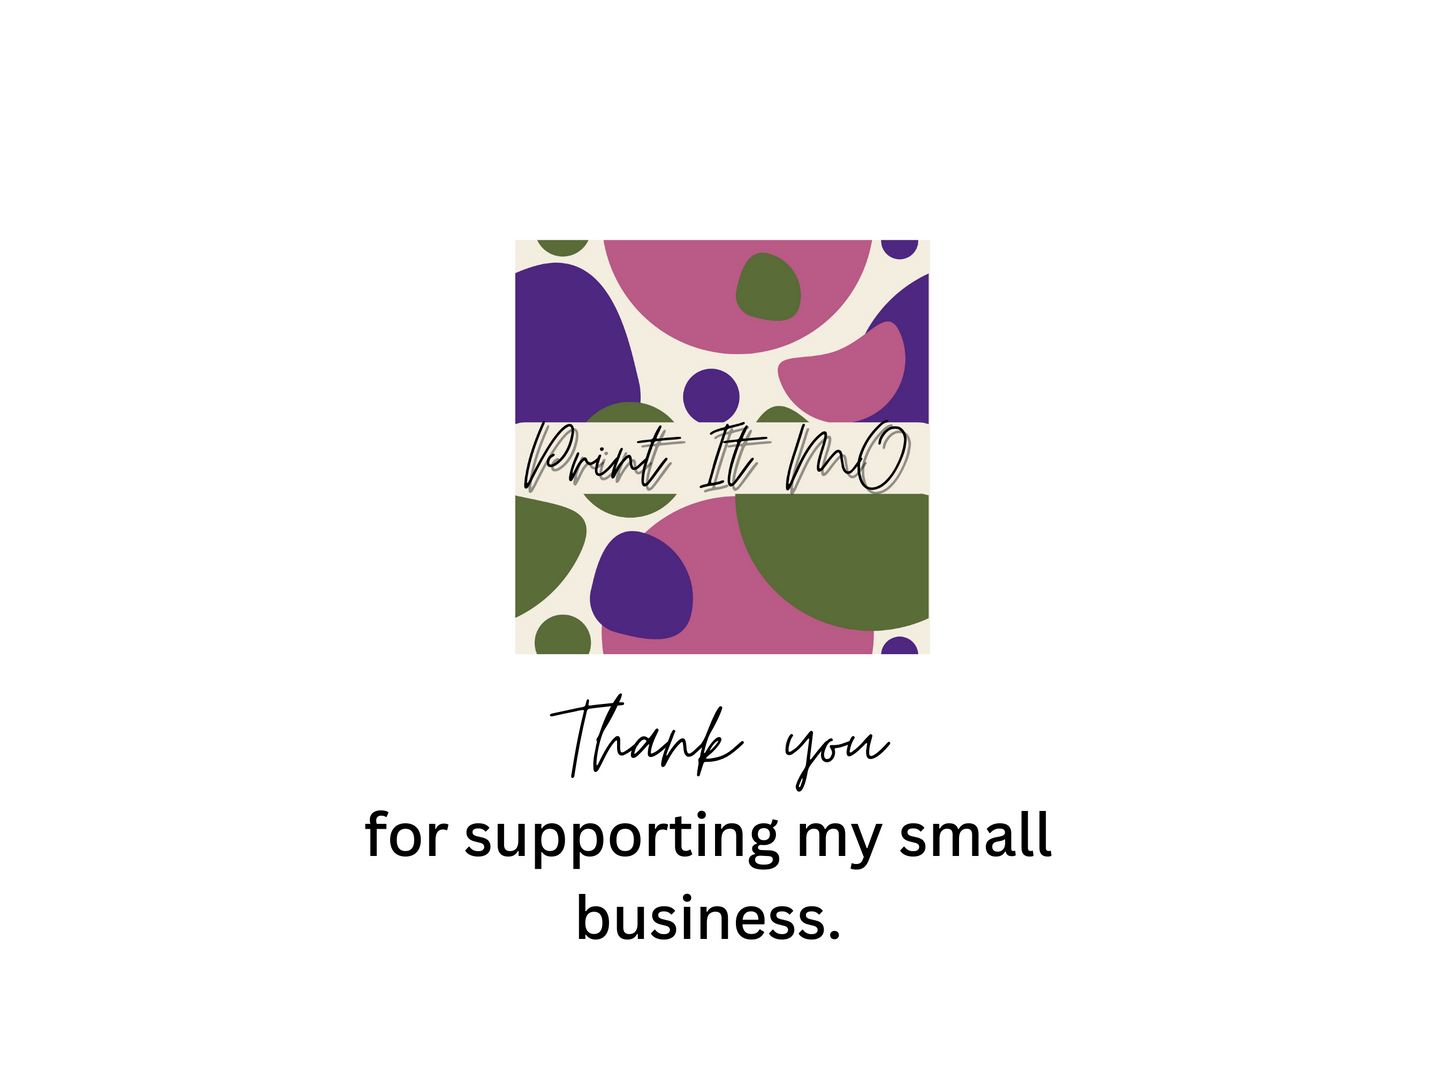 Print It Mo logo and thank you statement.